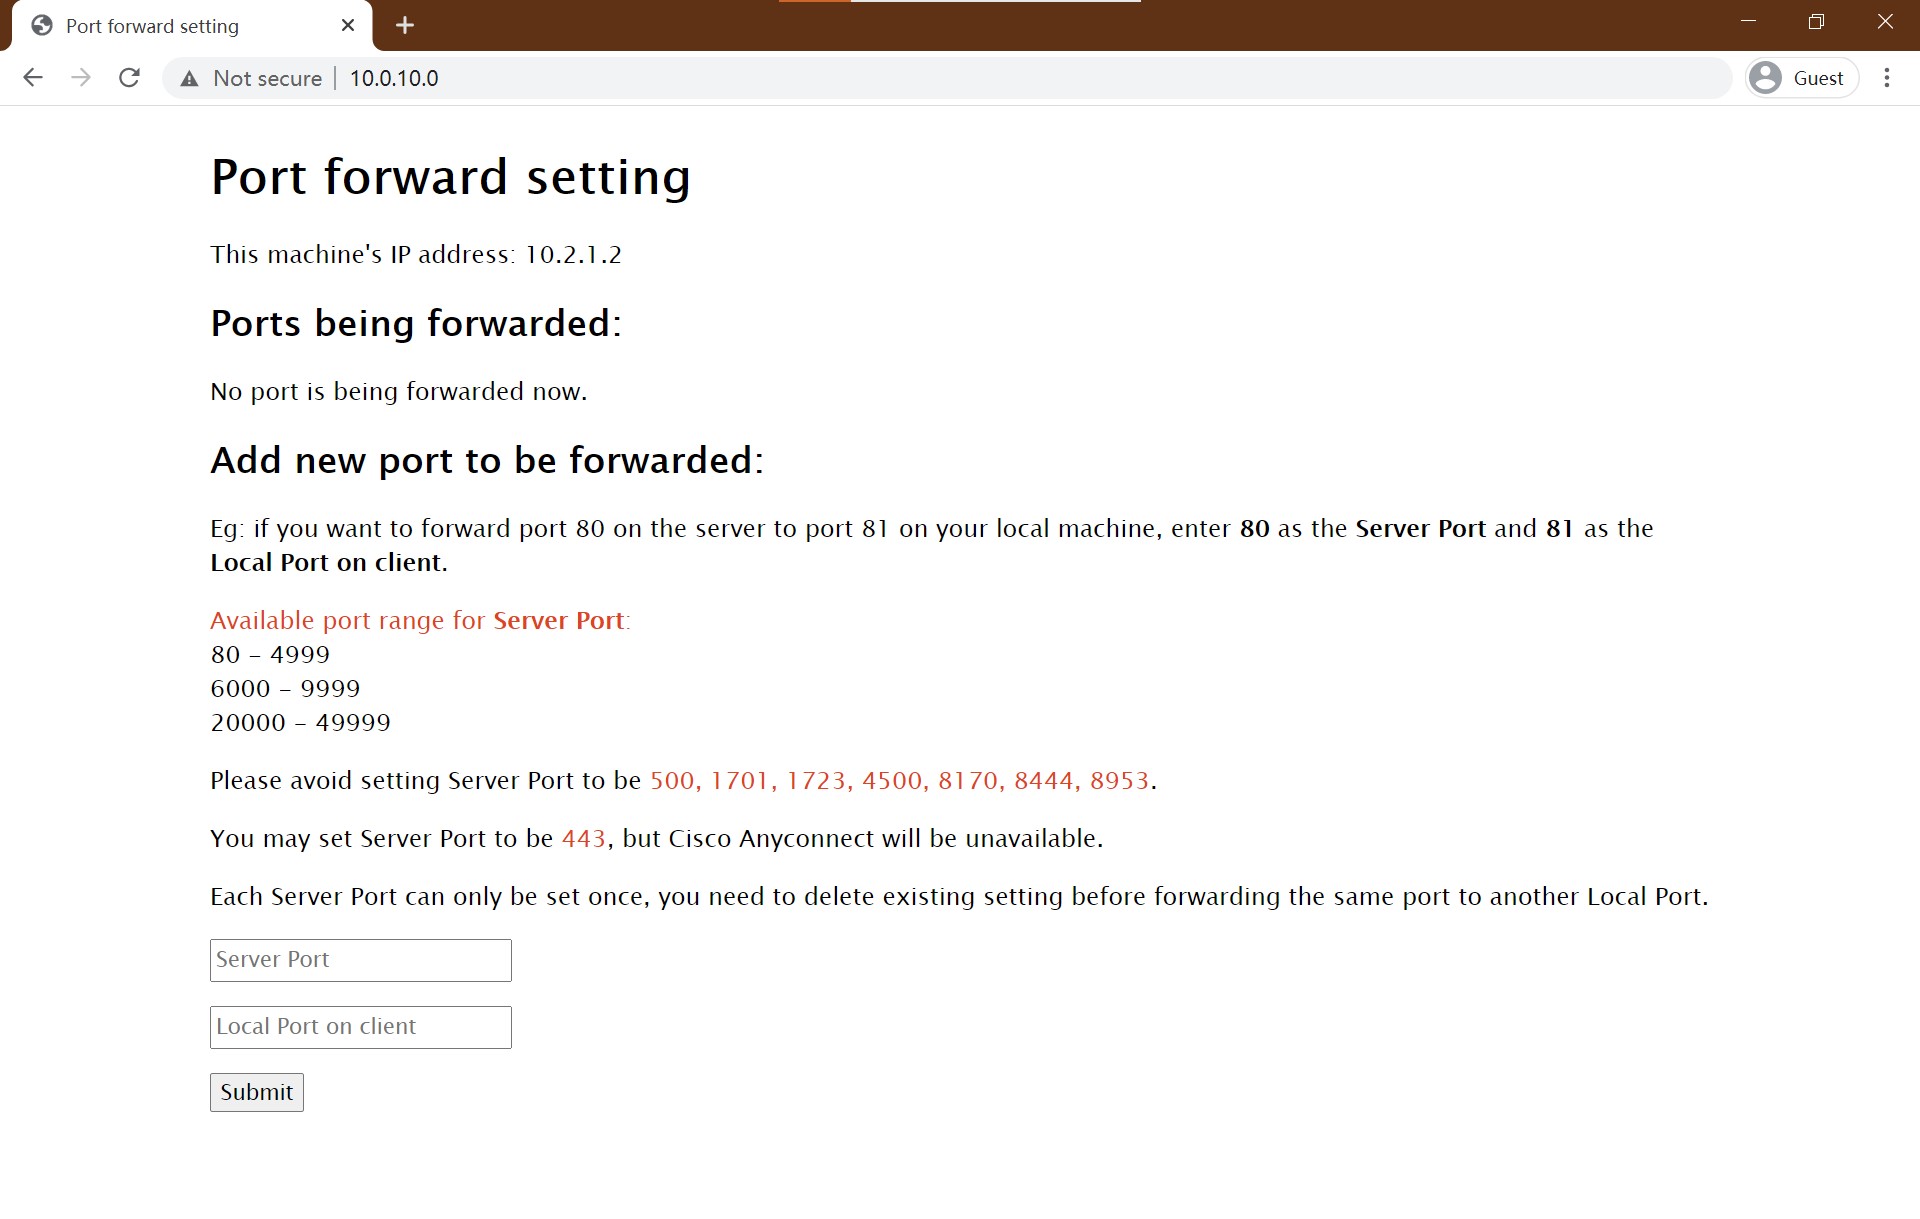 Port forwarding setting page